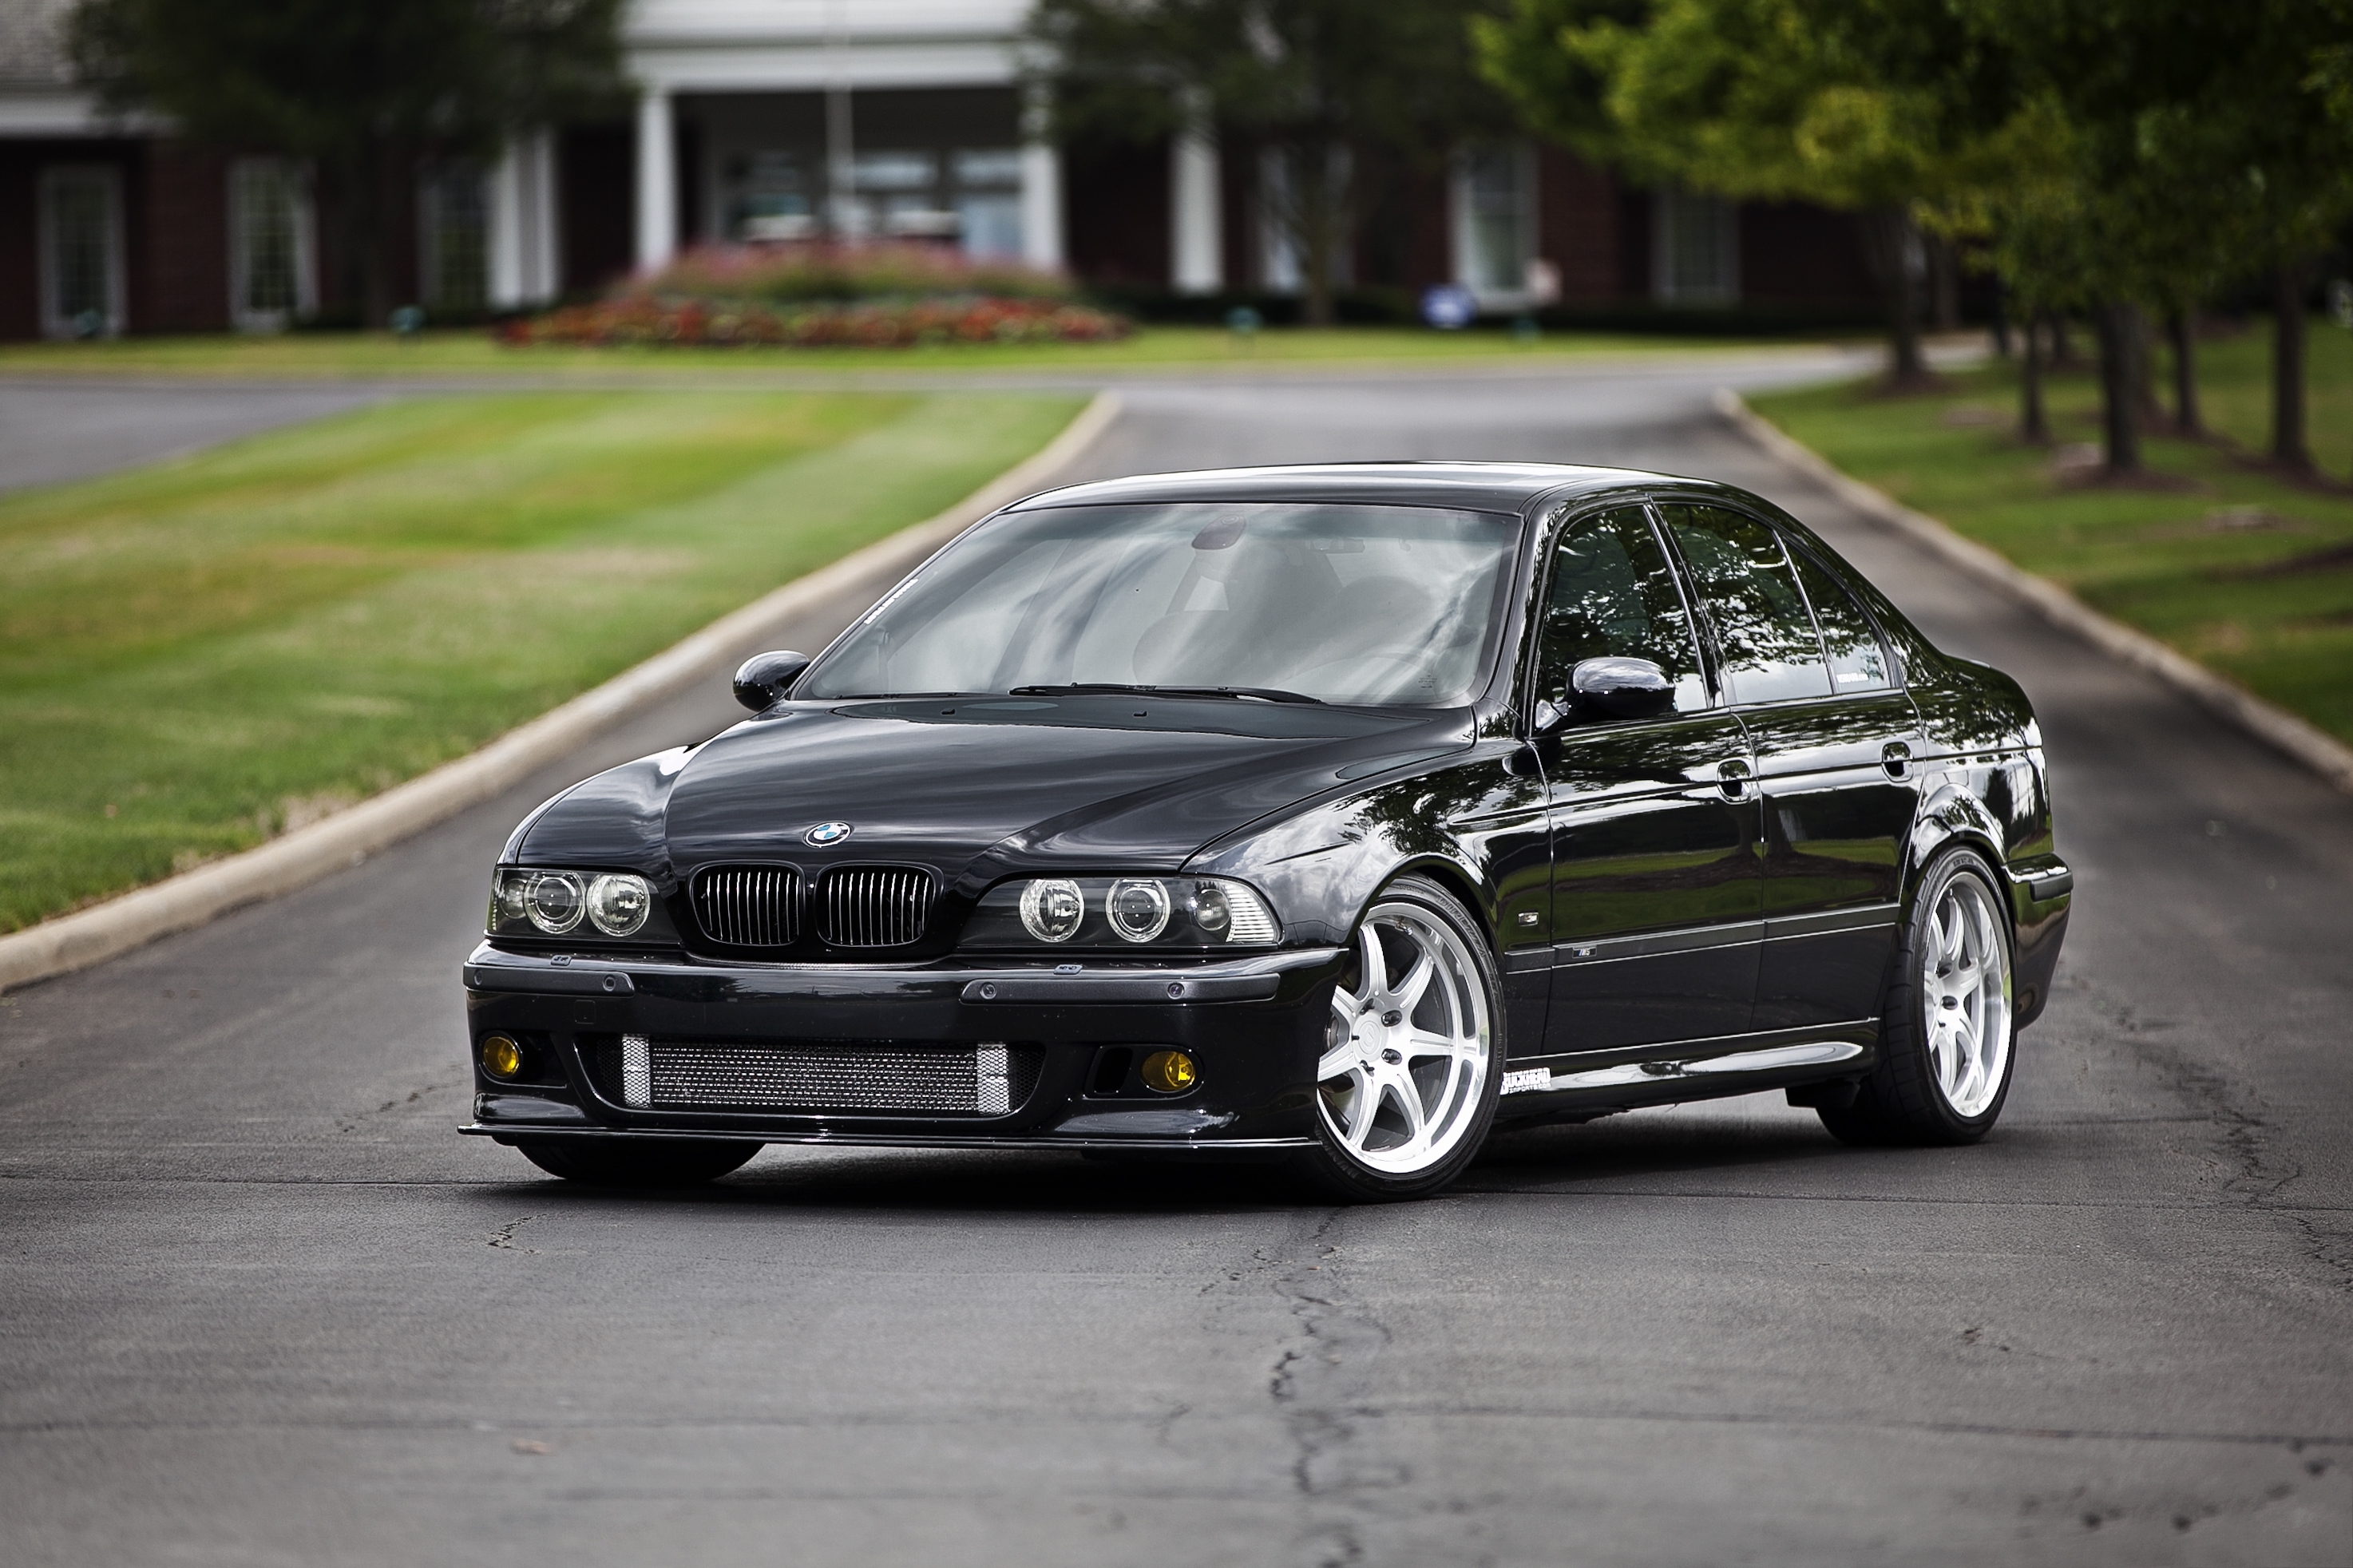 Wallpaper Bmw M5 E39 Car Pictures And Photos